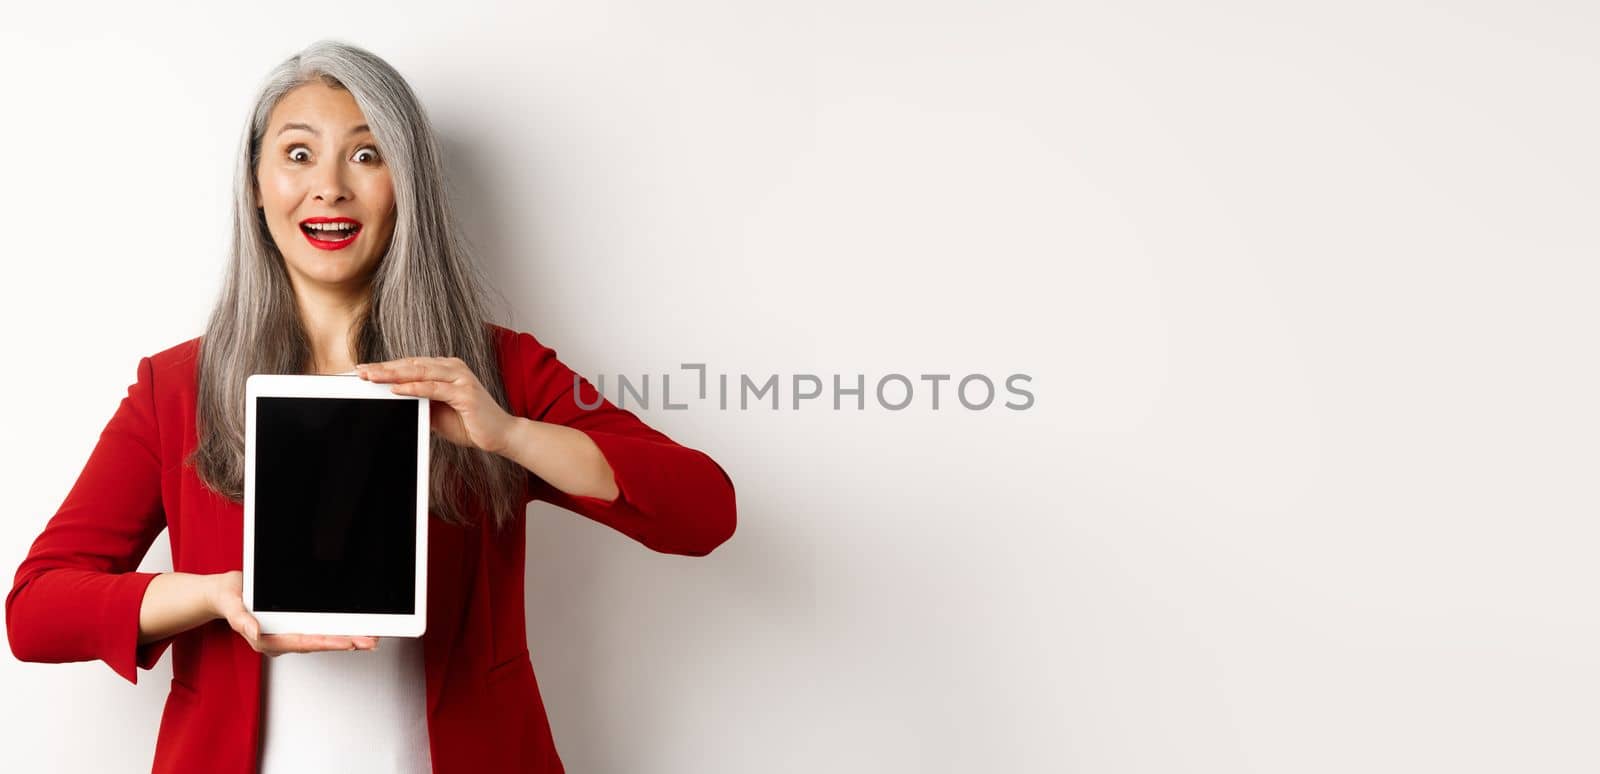 Business. Surprised asian female manager showing blank digital tablet screen, raising eyebrows and gasping fascinated, standing over white background.